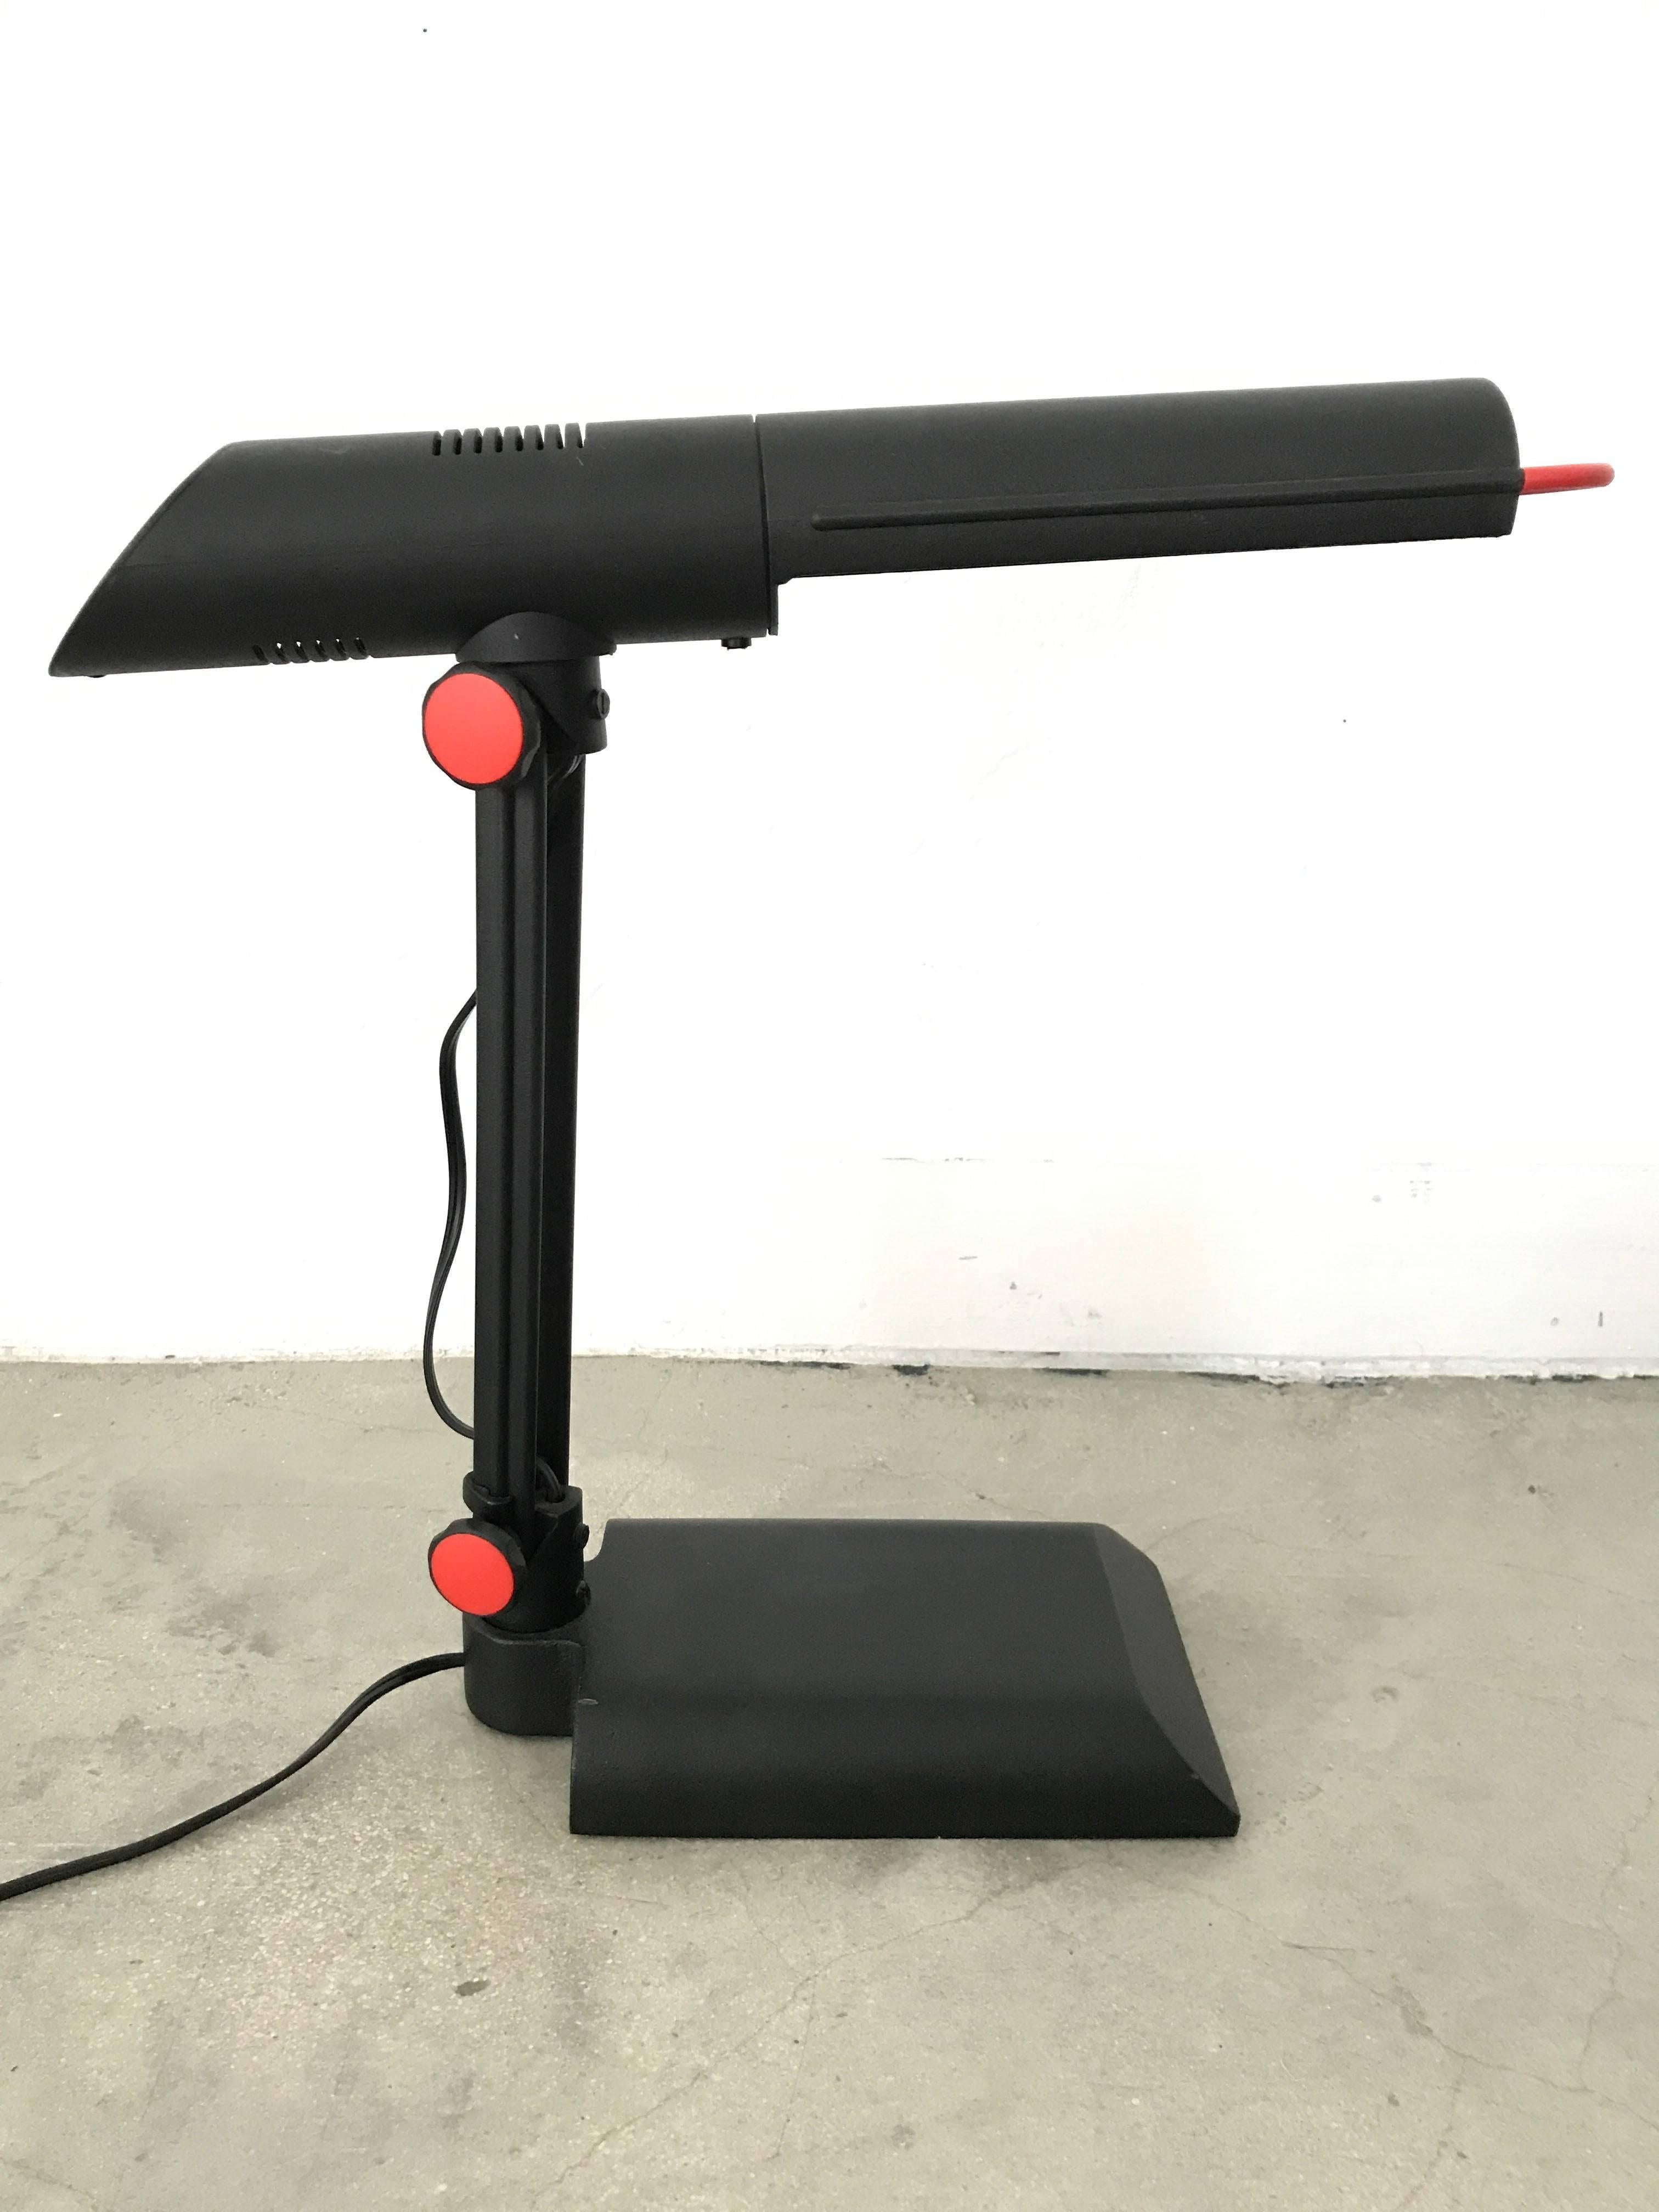 Postmodern articulating and adjustable desk task or table lamp rendered in red and black powder coated steel by Phillips, circa 1980s.